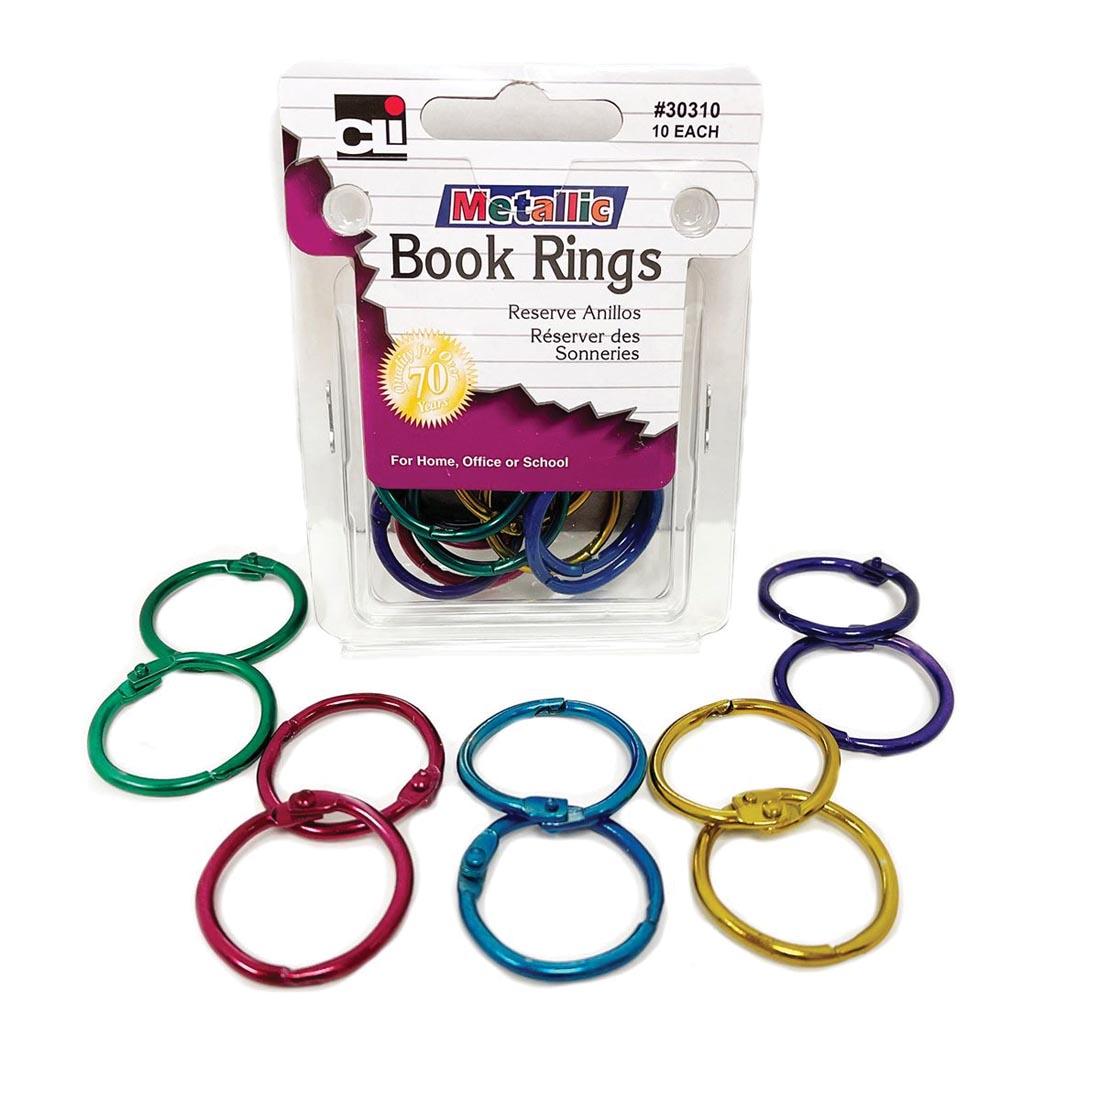 package of 1" Metallic Book Rings By Charles Leonard with 10 book rings surrounding it